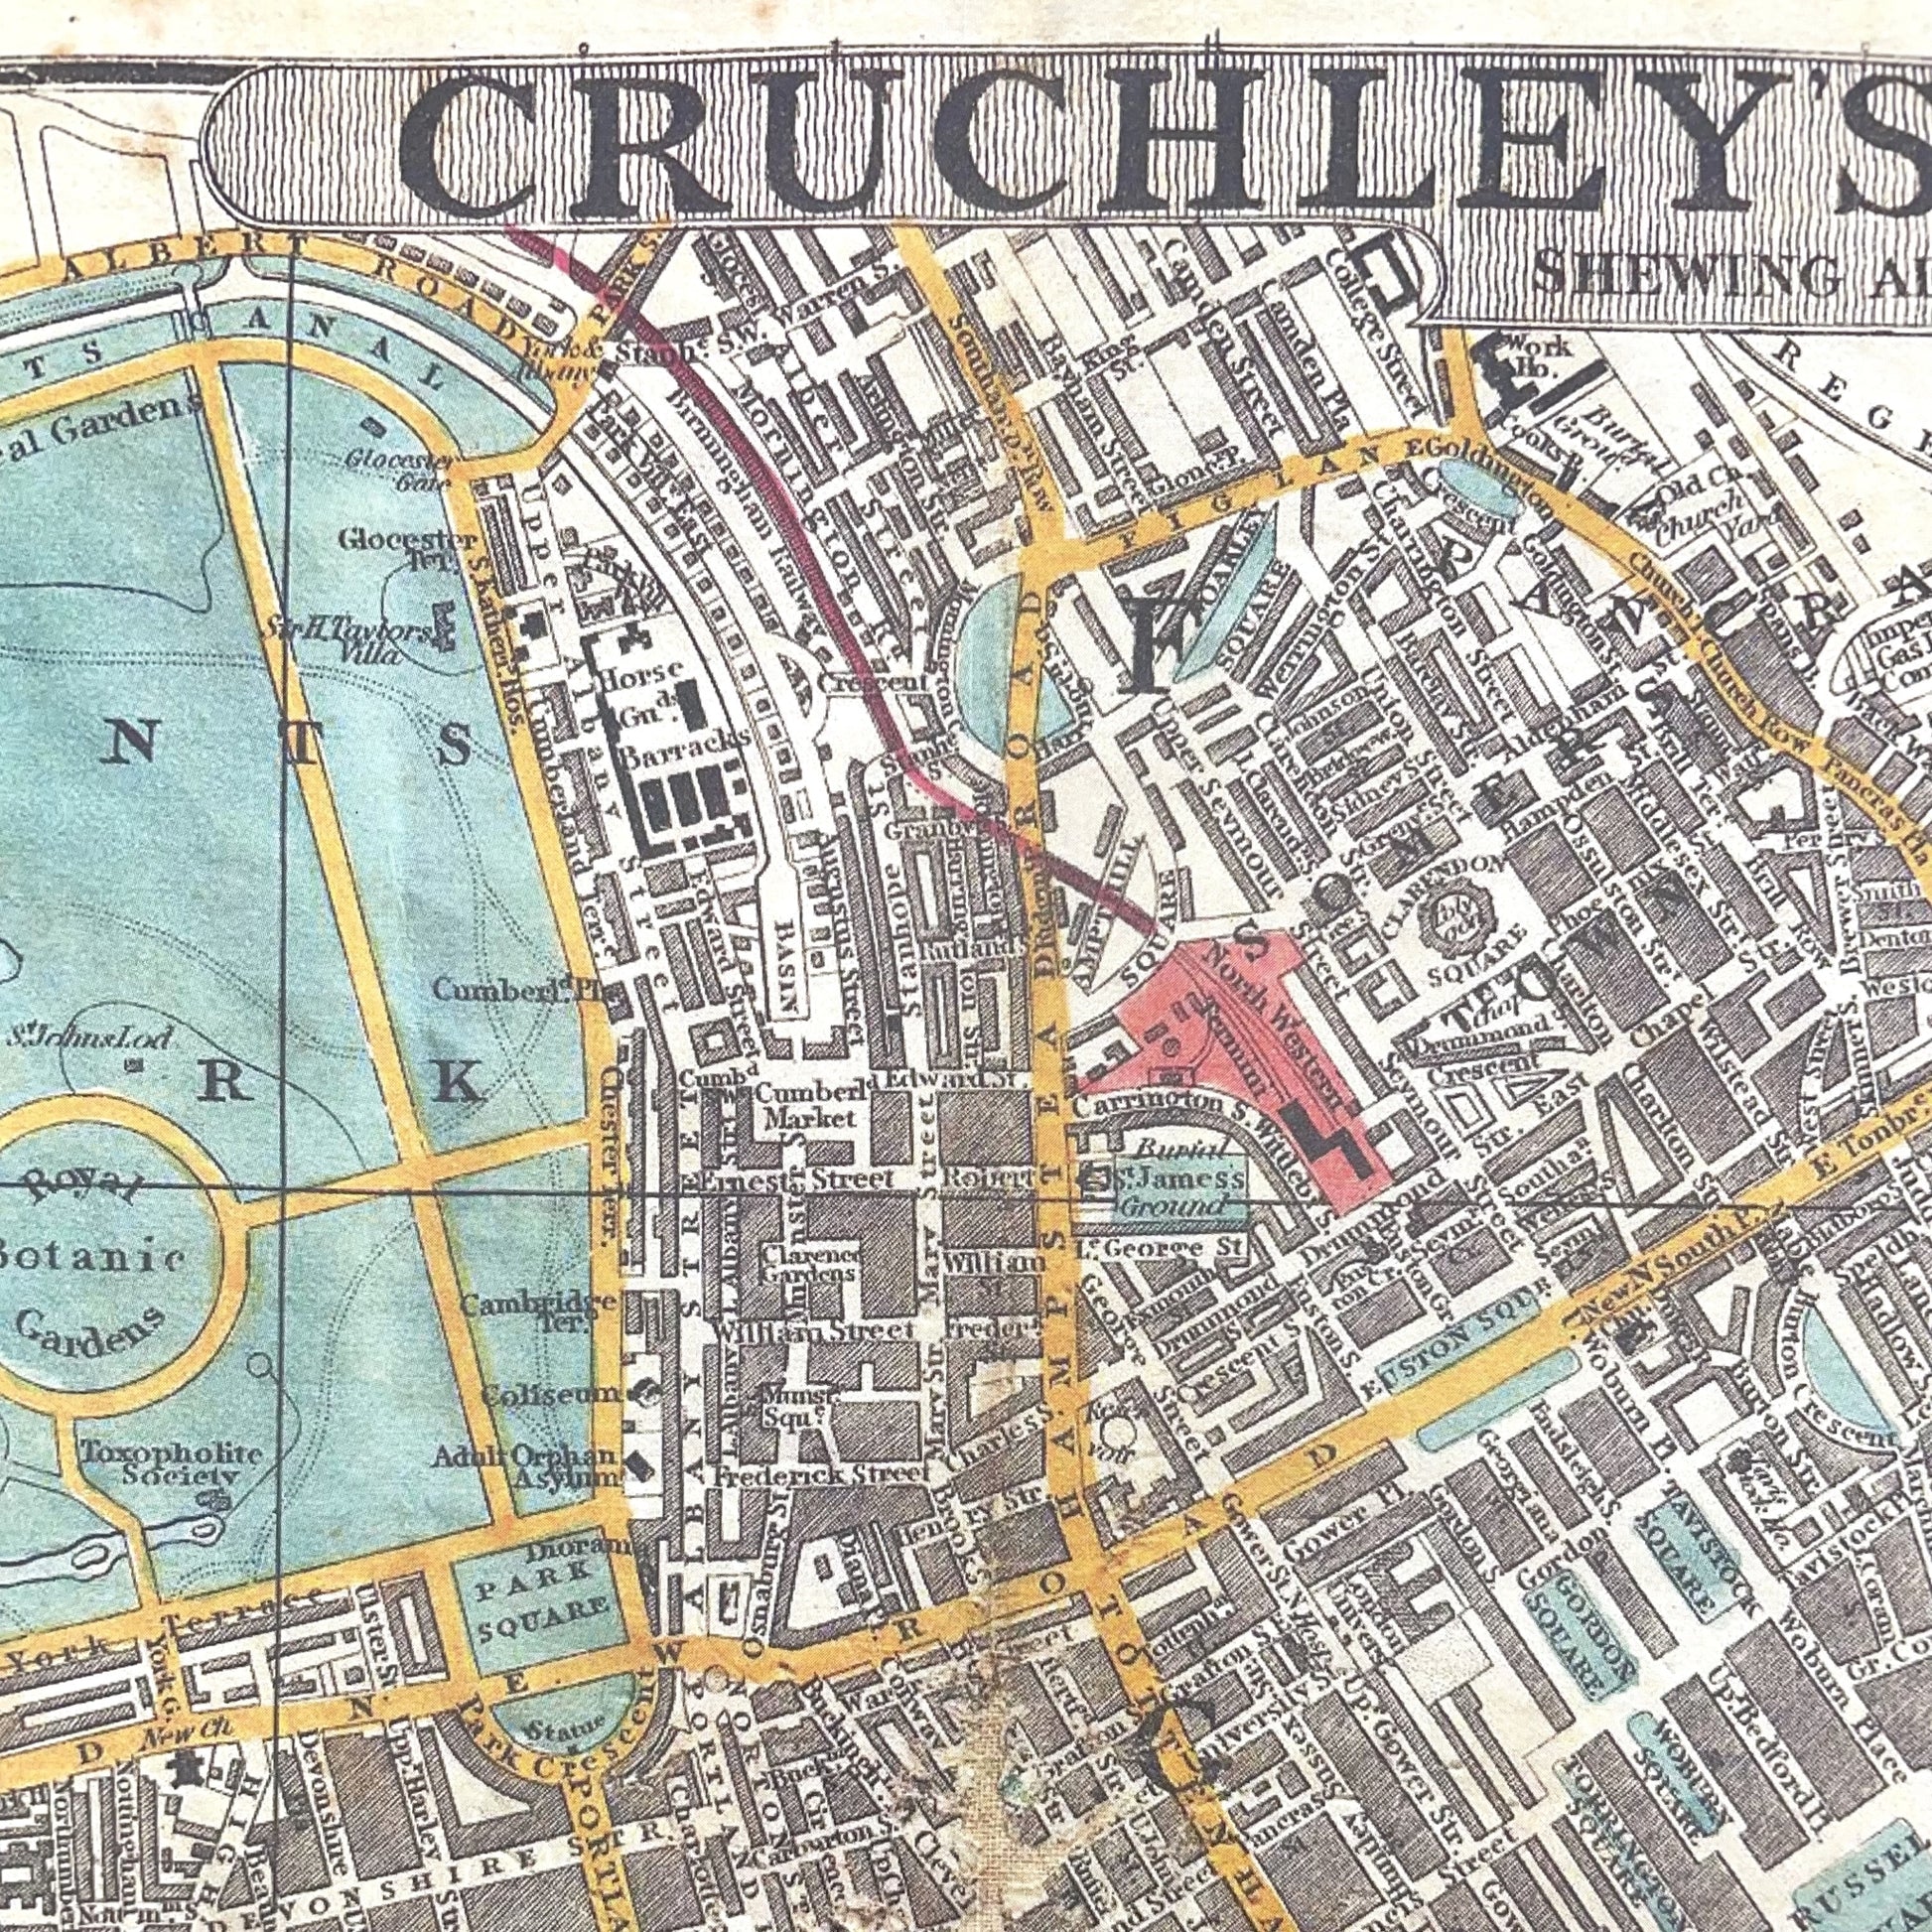 Wrapping paper with a vintage map of London (1848) by George Federick Cruchley. The map shows the proposed developments for London at this time and extends from Hyde Park in the west to the Docklands in the East, detail of the map